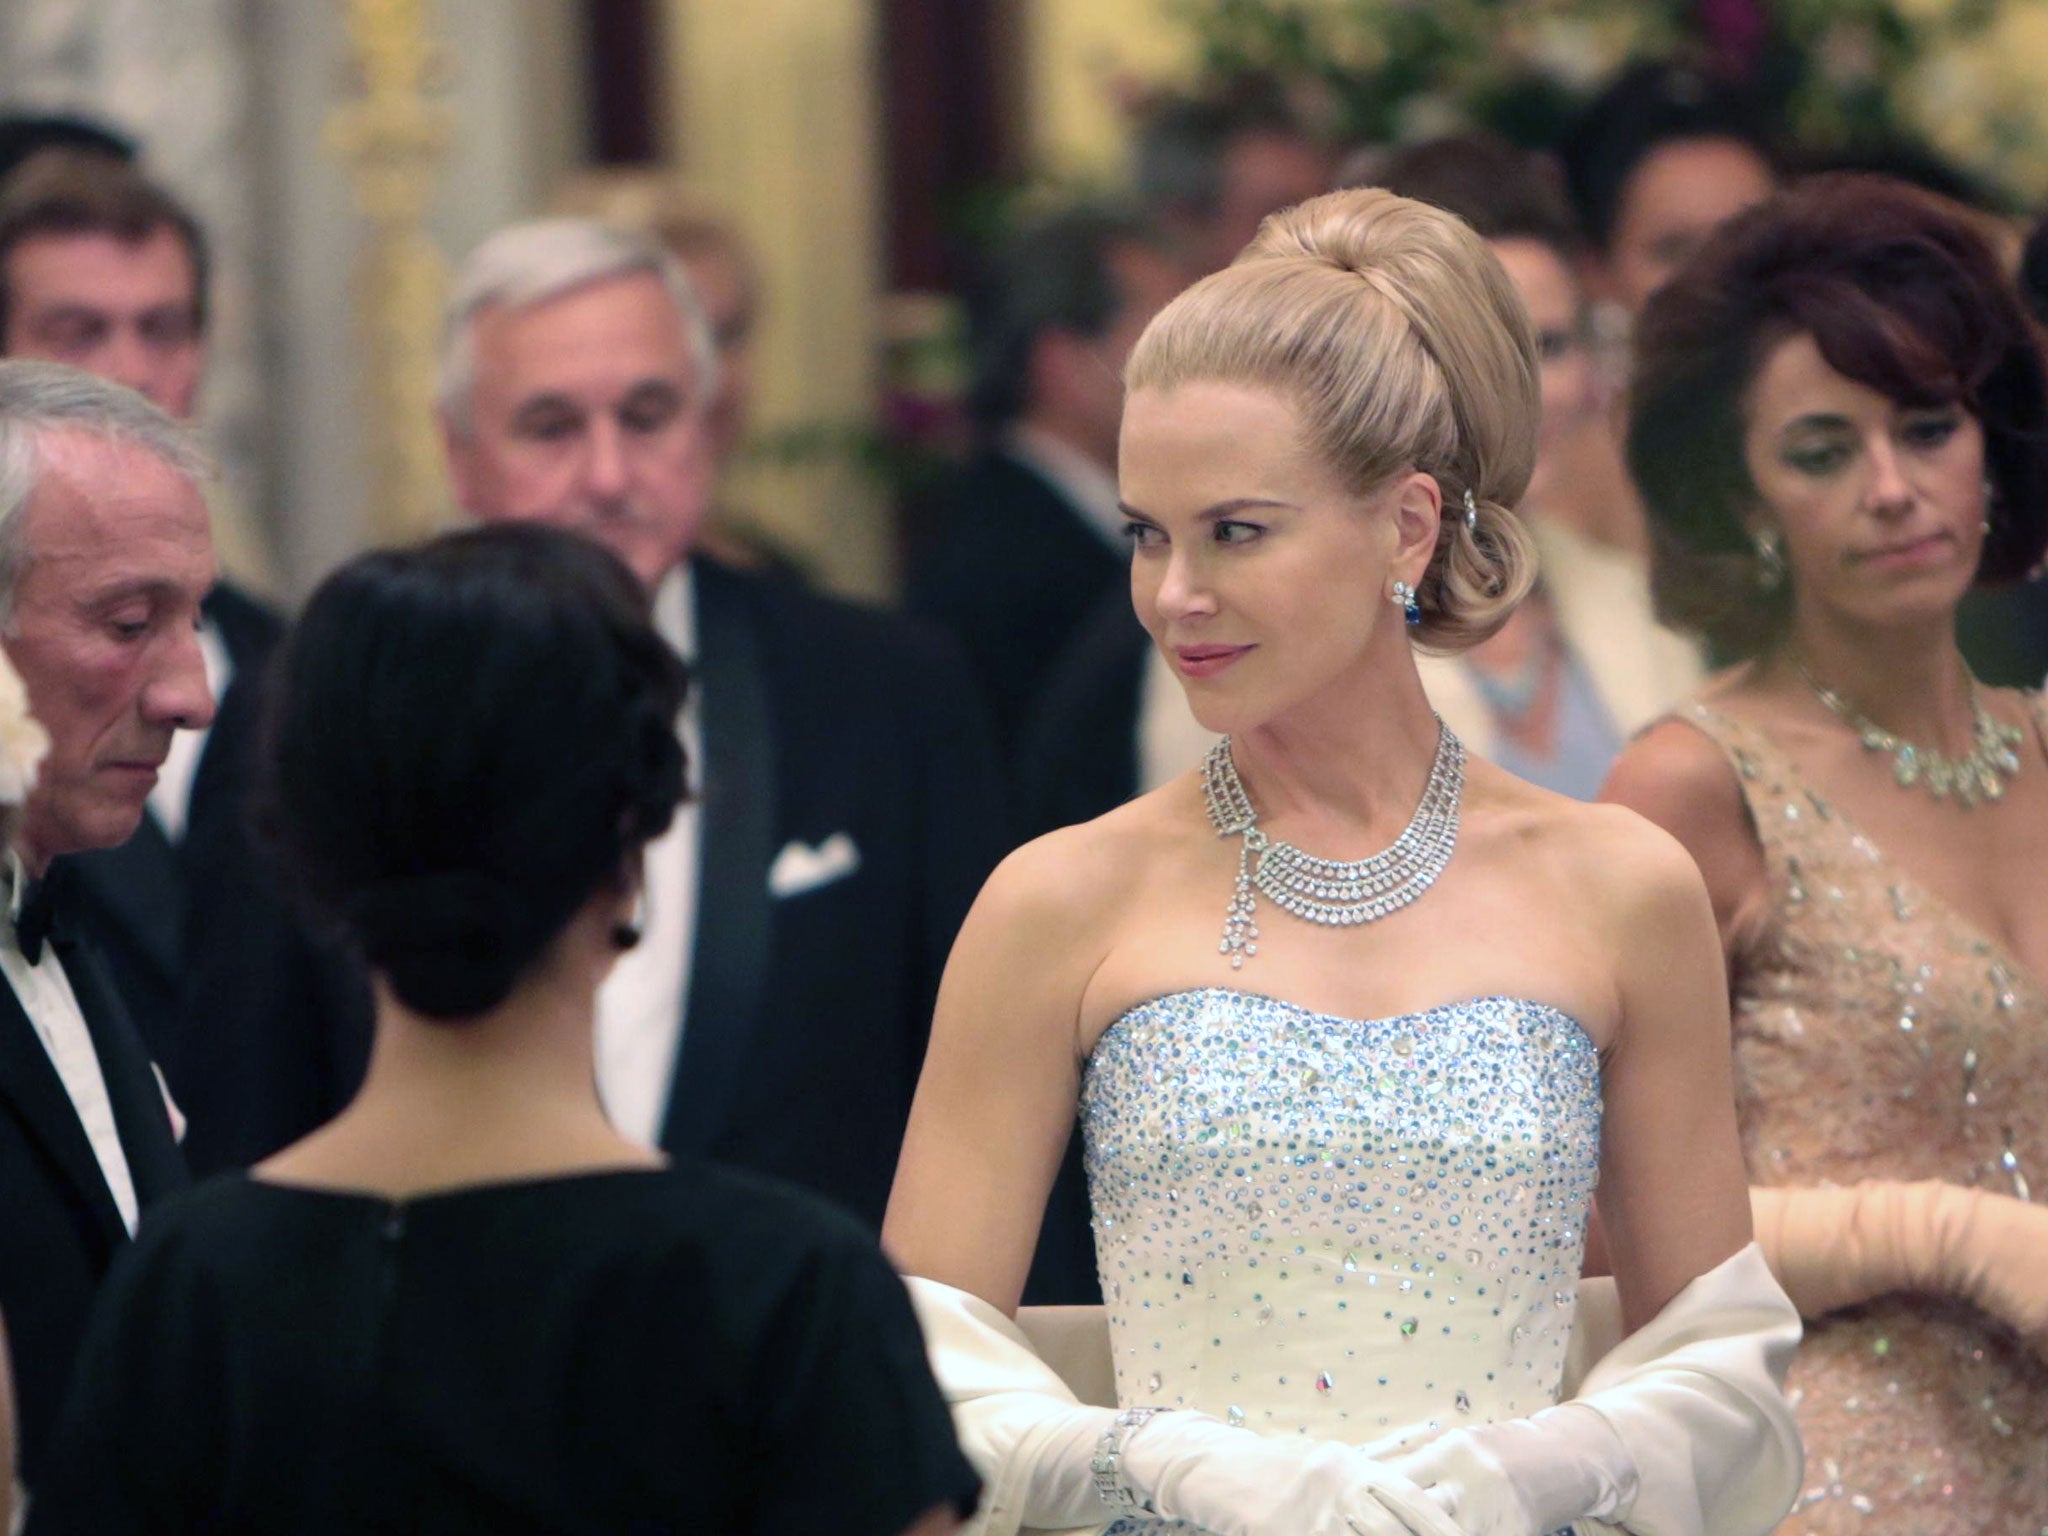 Nicole Kidman was named worst actress for her performance as Grace Kelly in Grace of Monaco